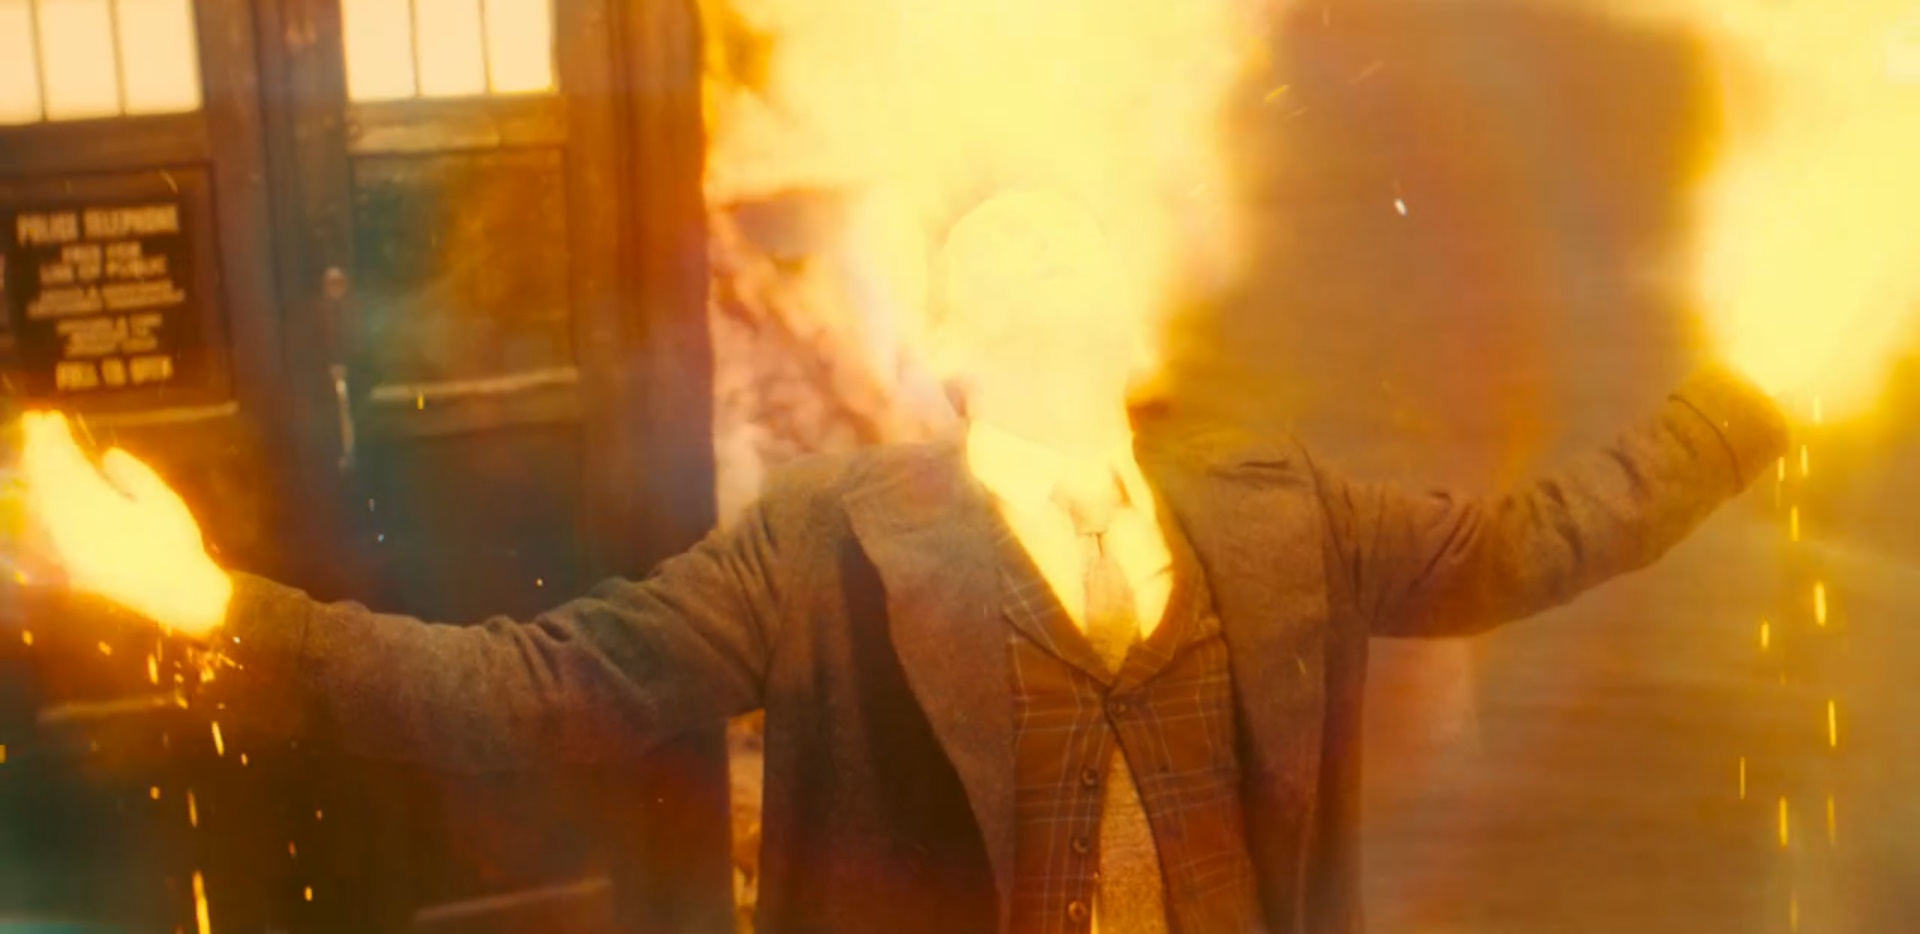 End of a regeneration. (TV: The Power of the Doctor [+]Loading...["The Power of the Doctor (TV story)"])